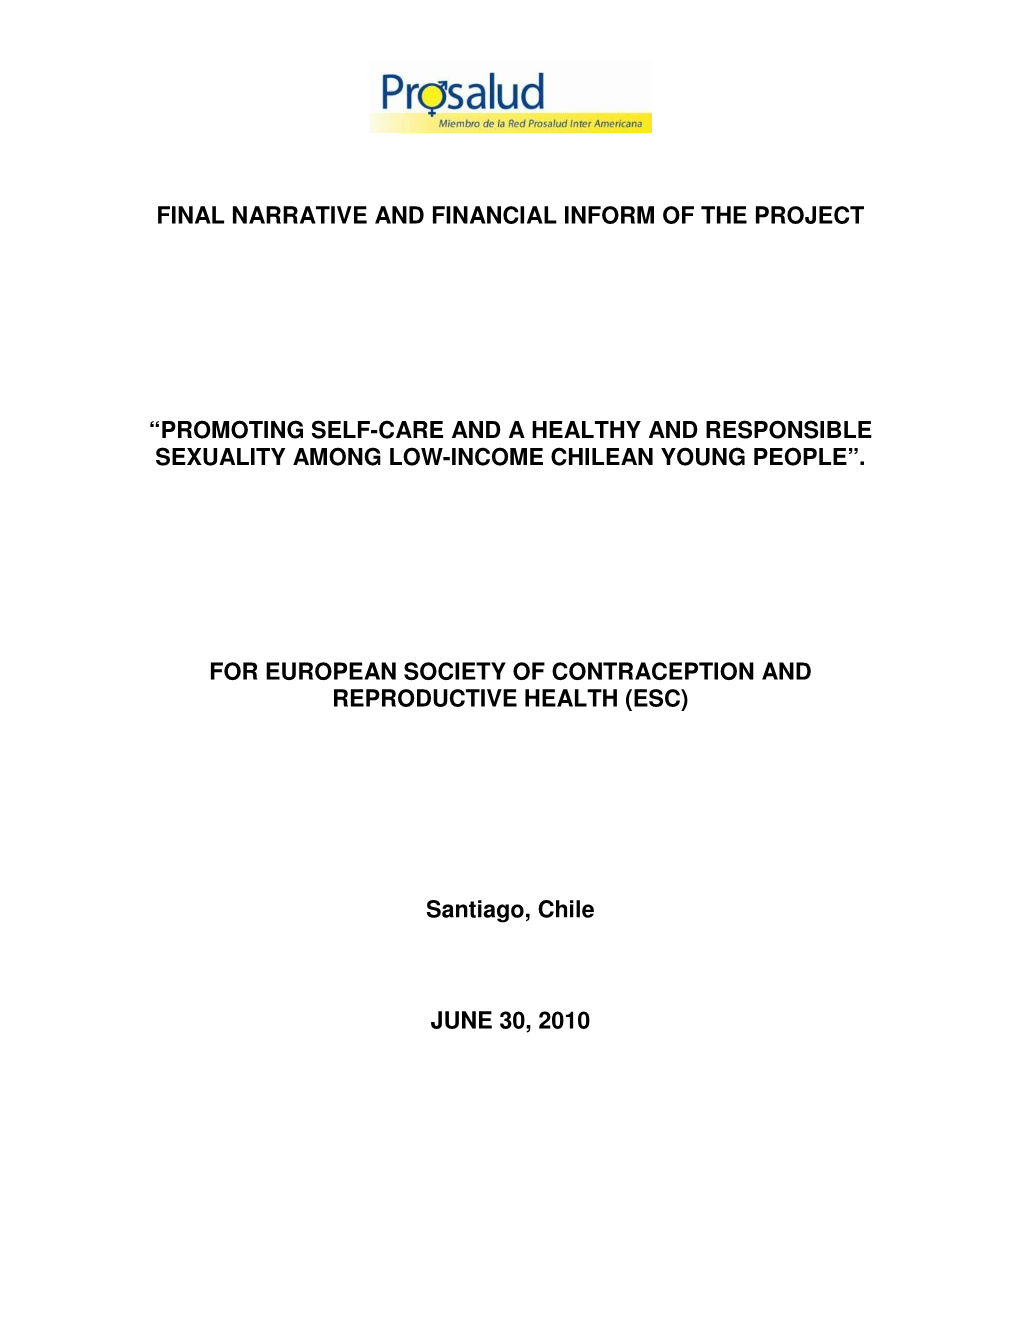 Final Narrative and Financial Inform of the Project